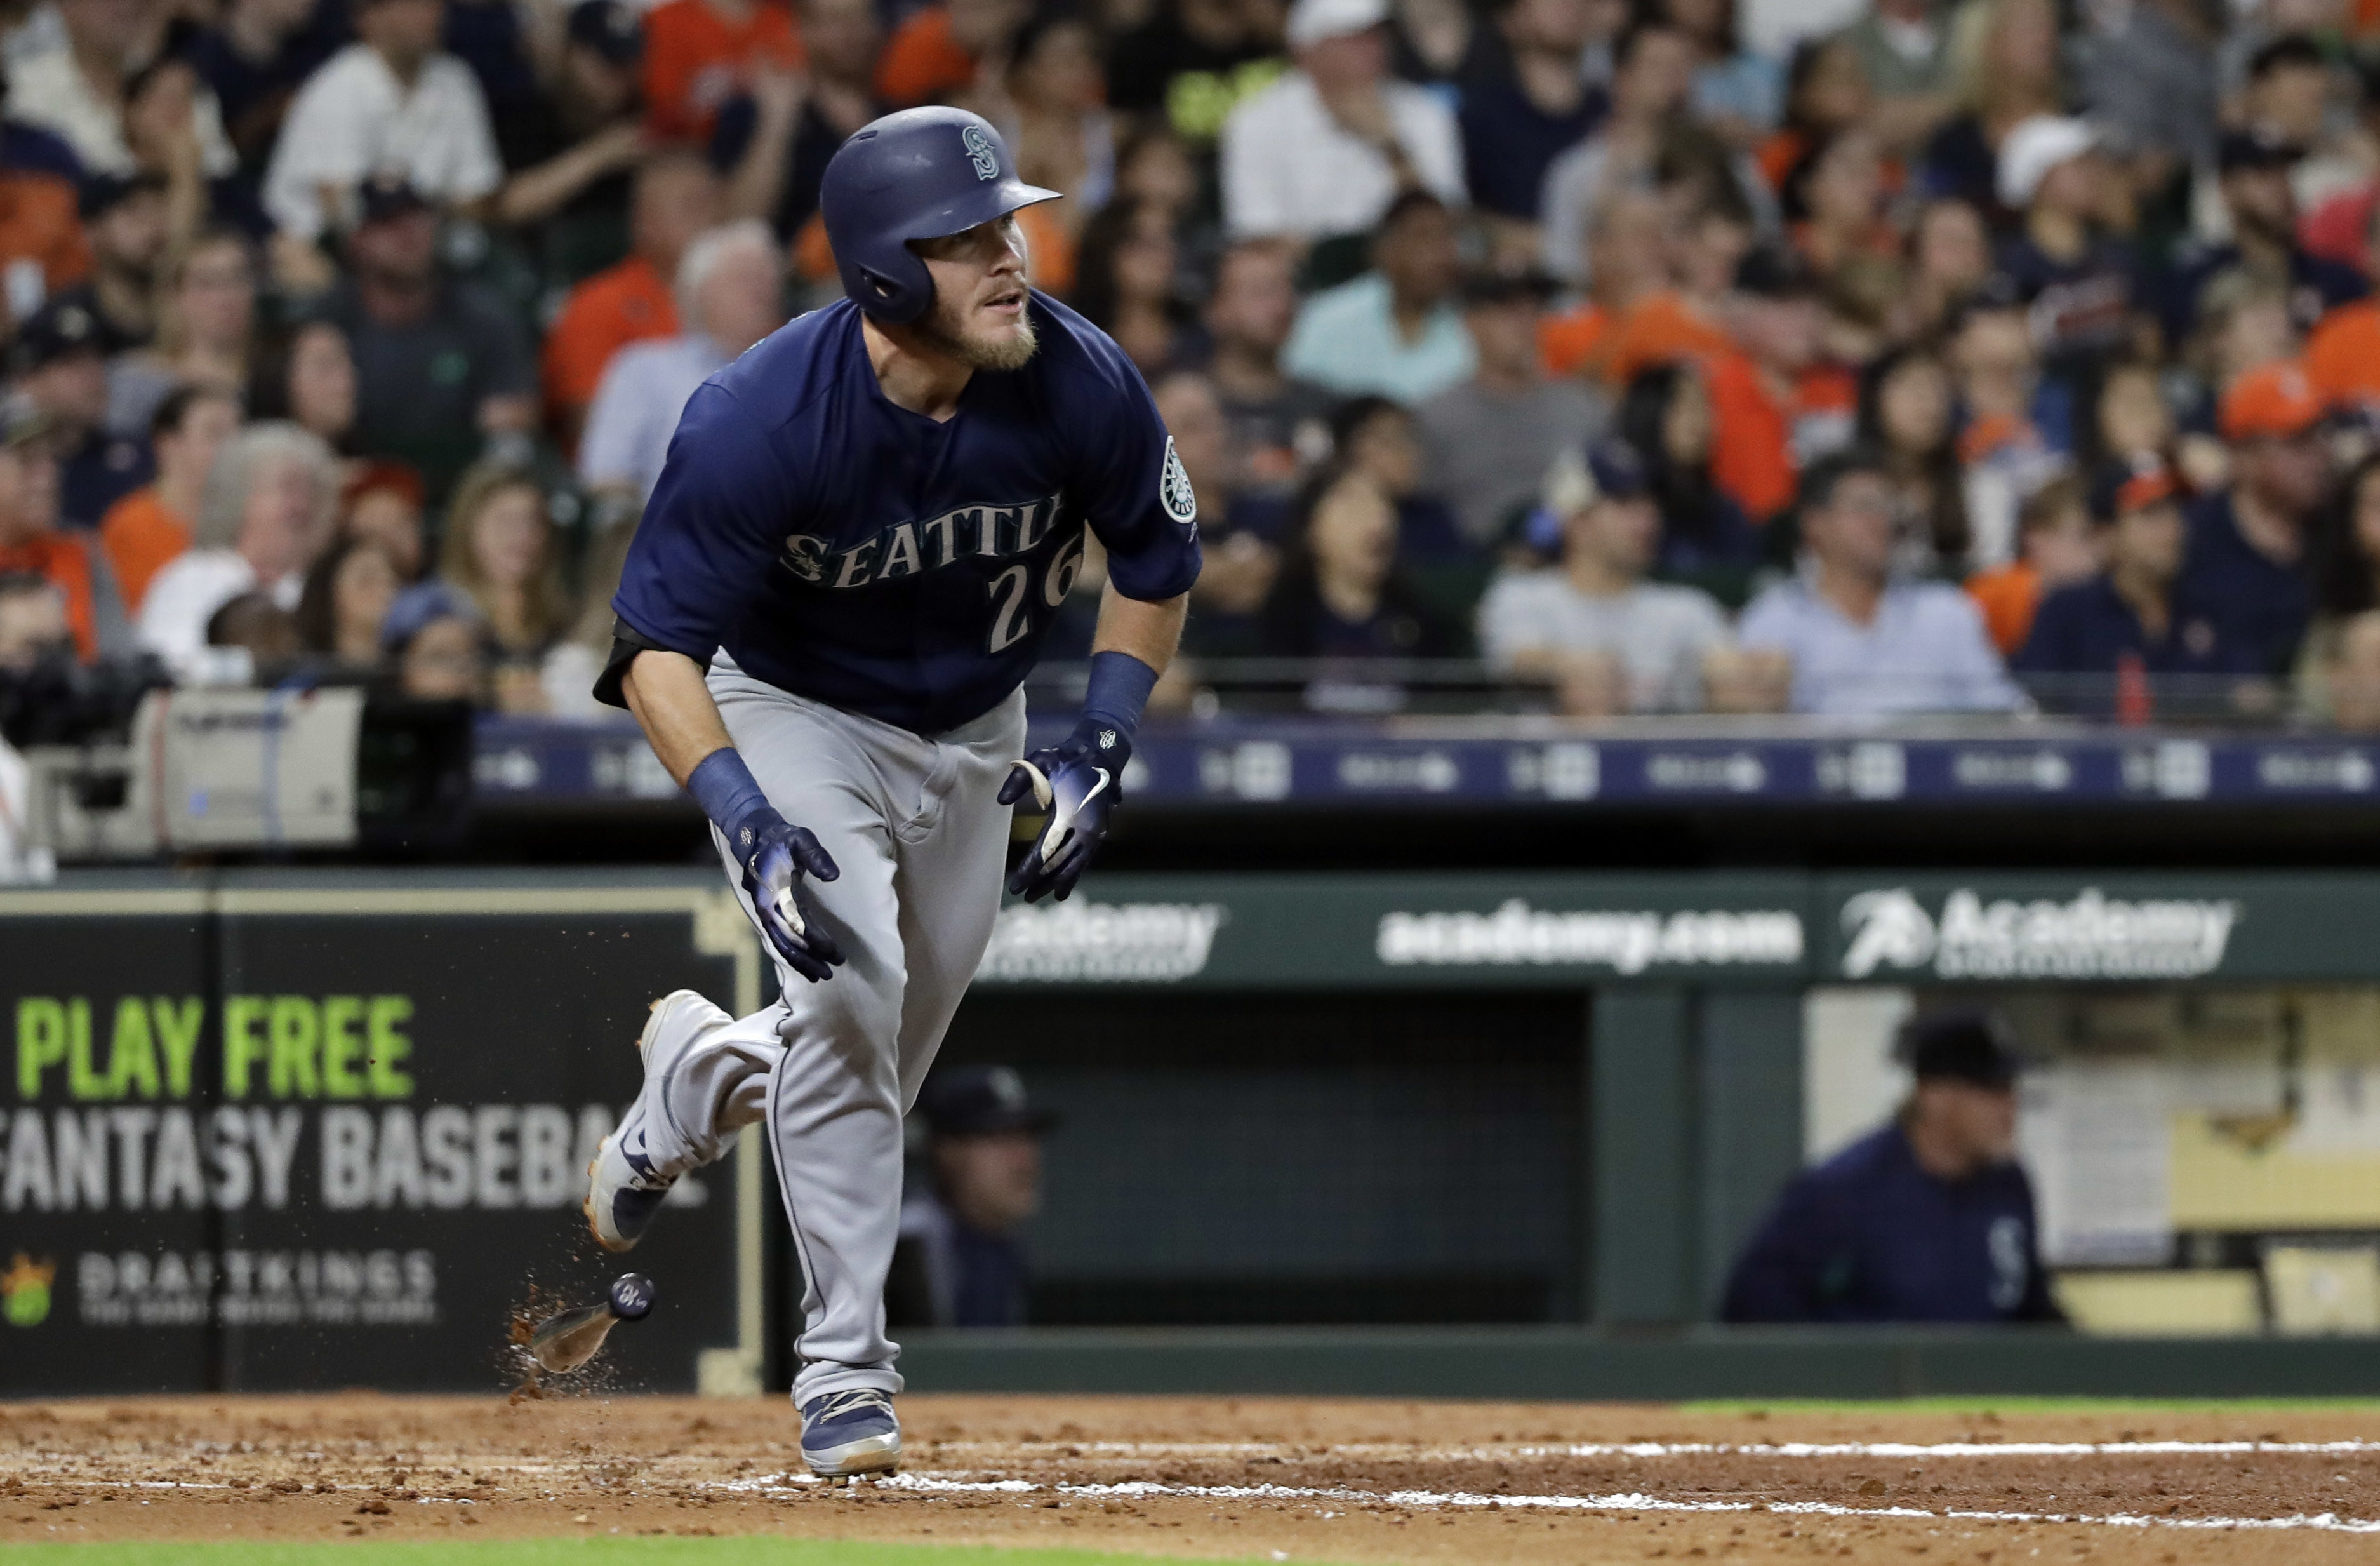 Healy helps Mariners rally to take 3rd straight from Astros